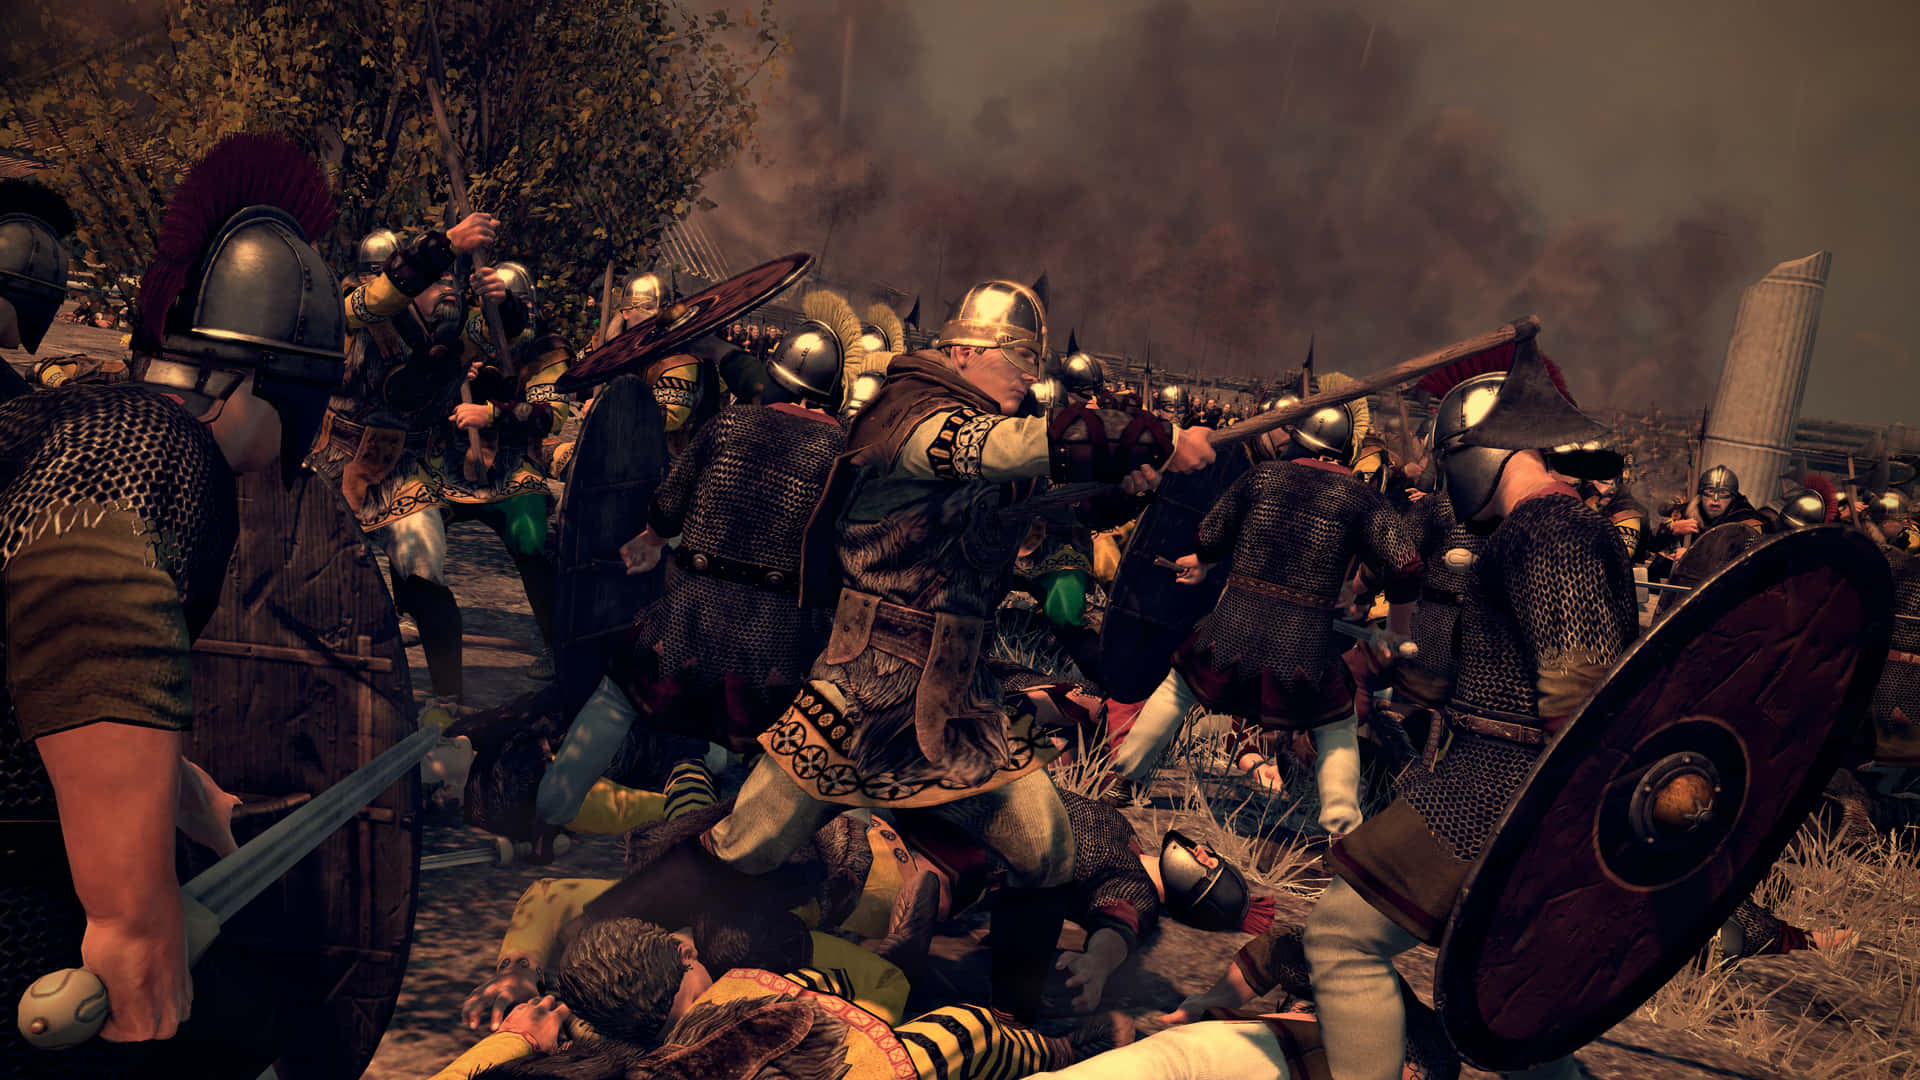 A Group Of Men In Armor Fighting In A Battle Background